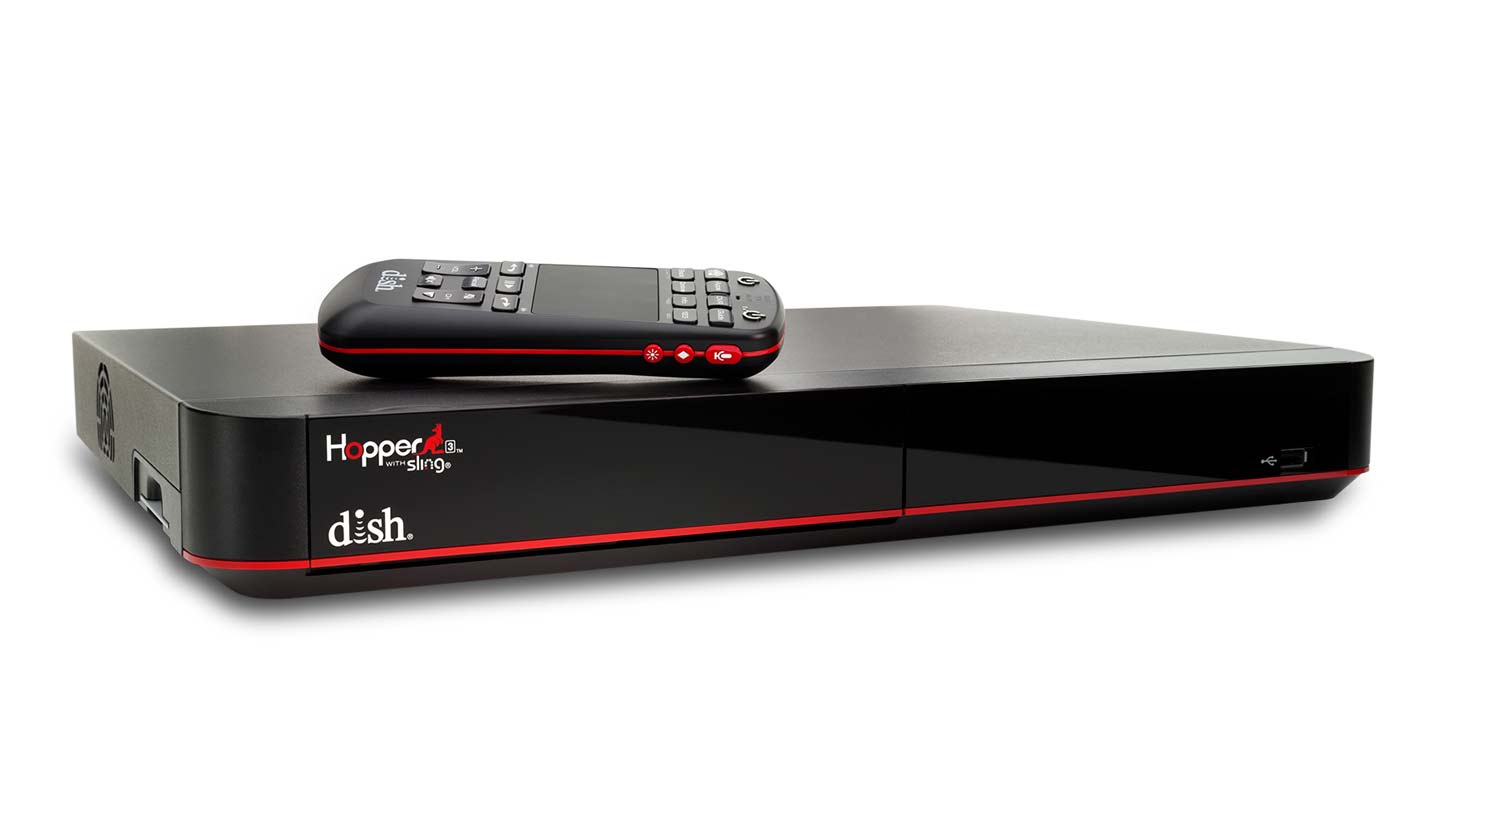 Dish Hopper 3 Review The Best Just Keeps Getting Better Tom's Guide